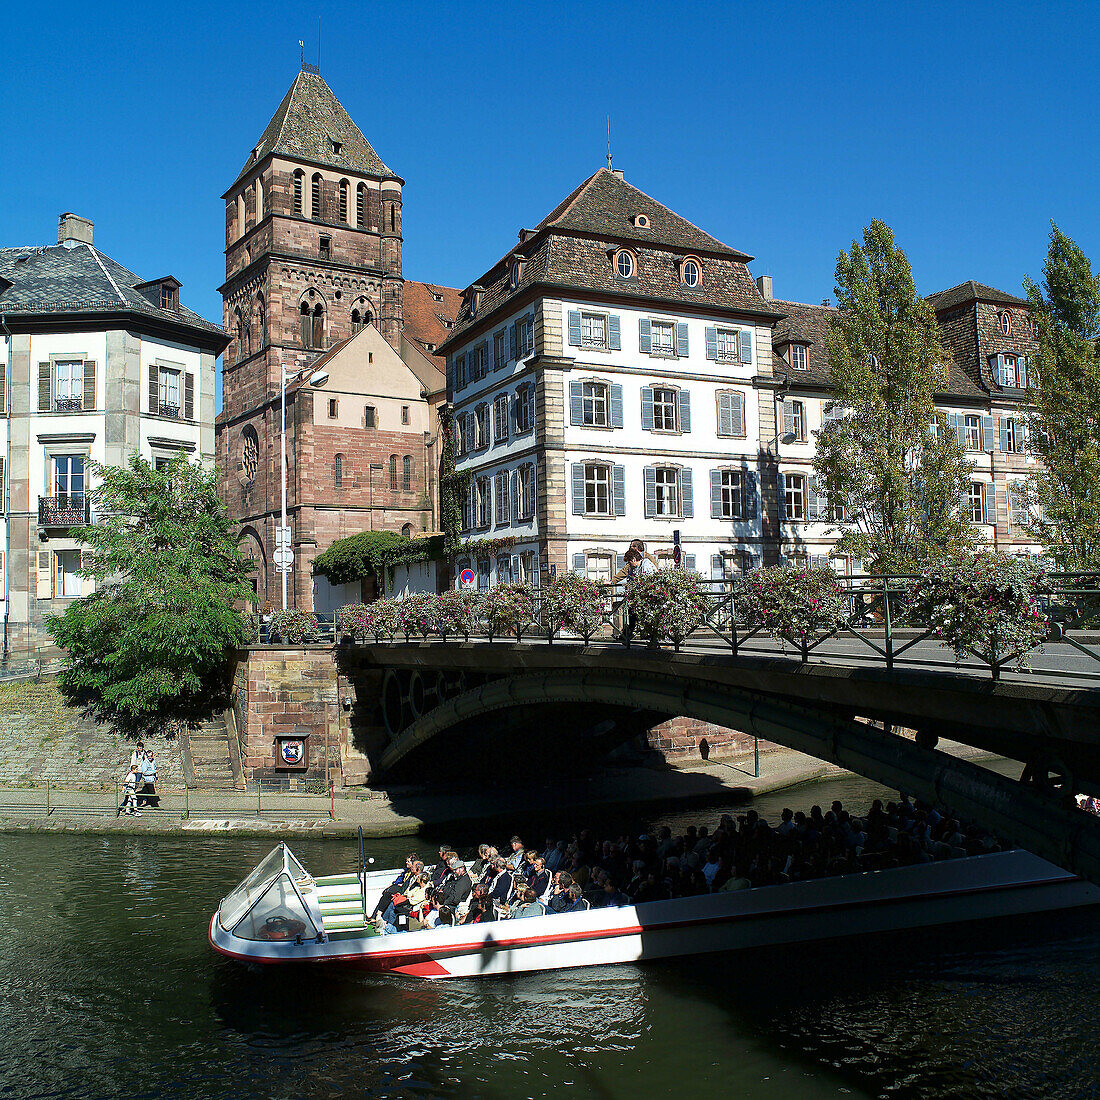 Sightseeing boat and St. Thomas church in background. Strasbourg. France